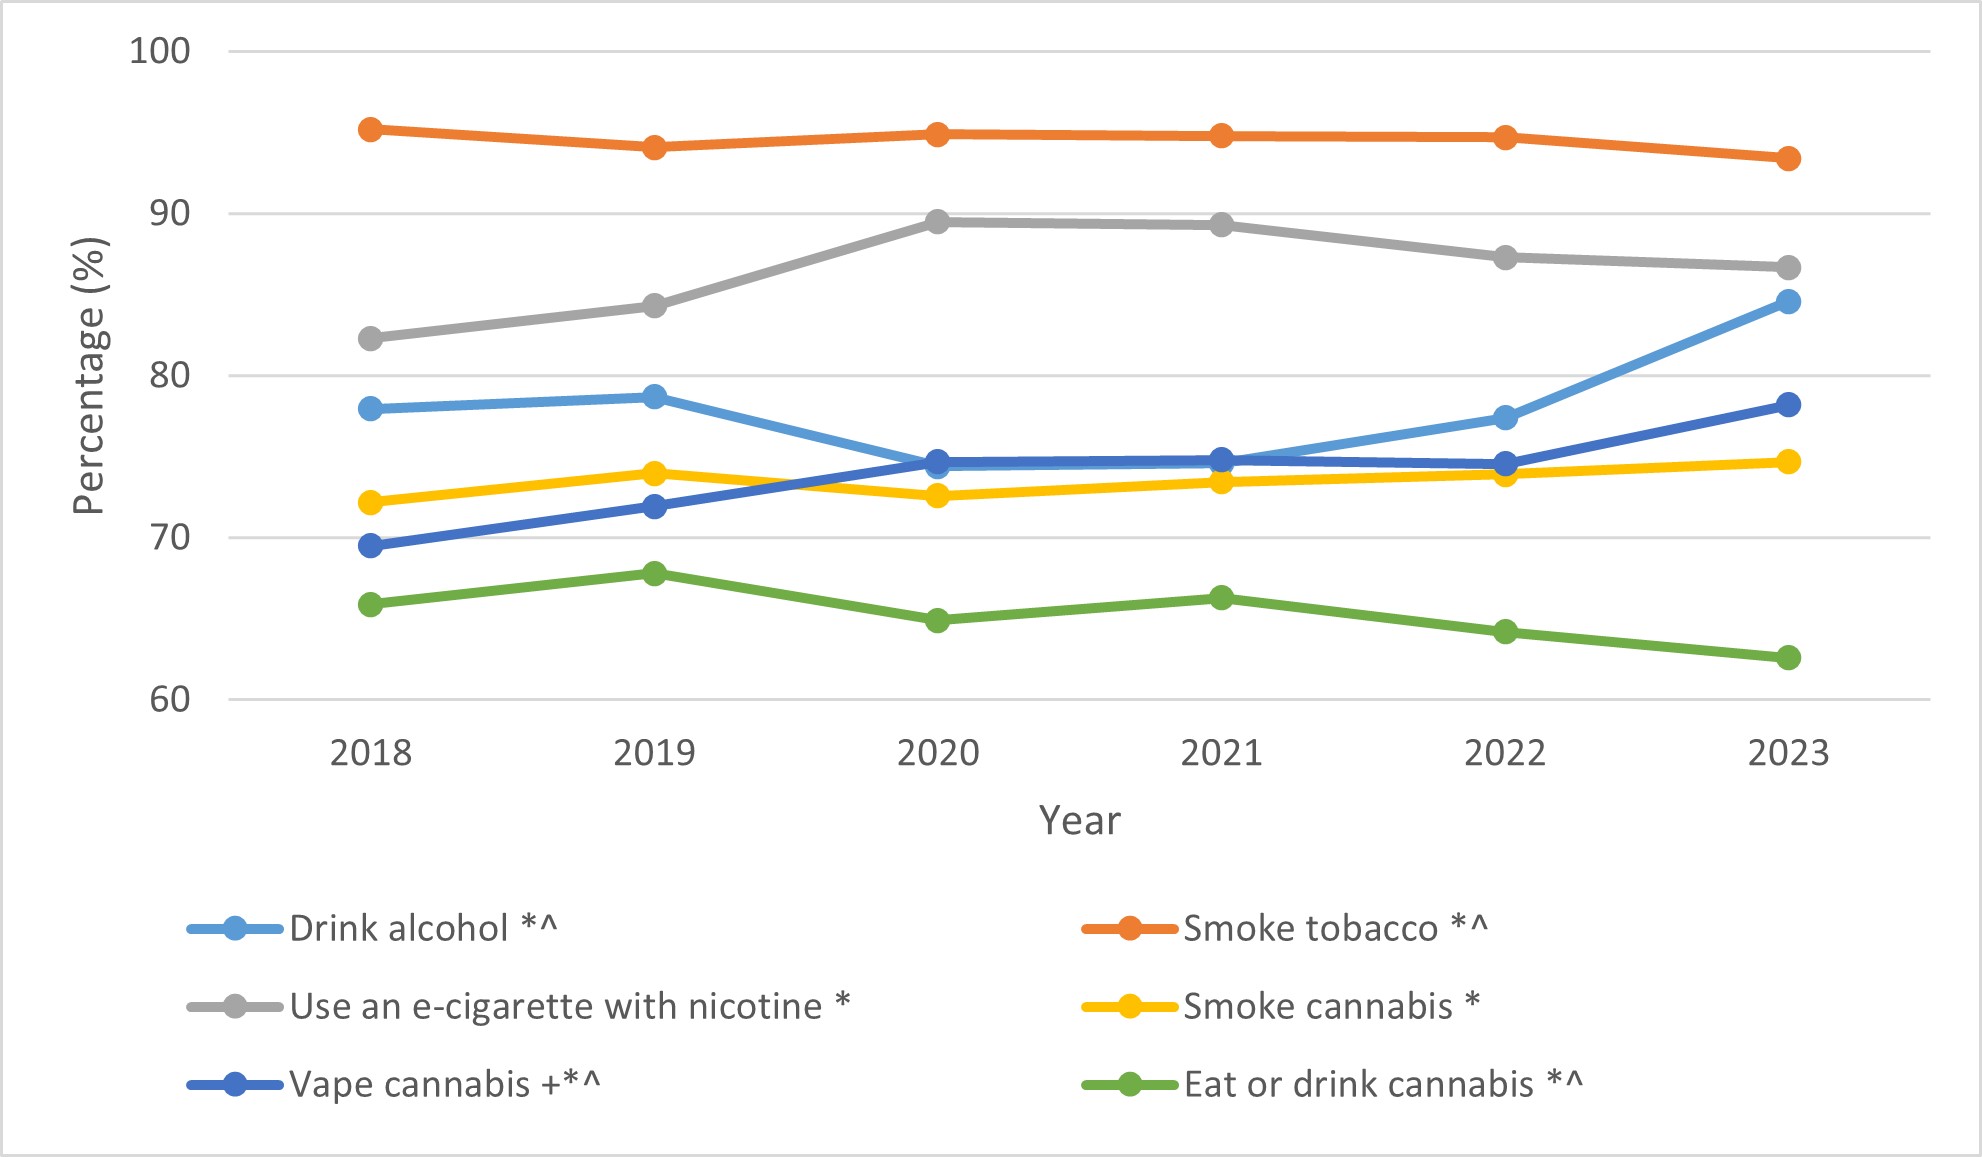 Perceived risk of using various substances regularly, 2018 to 2023. Text description follows.